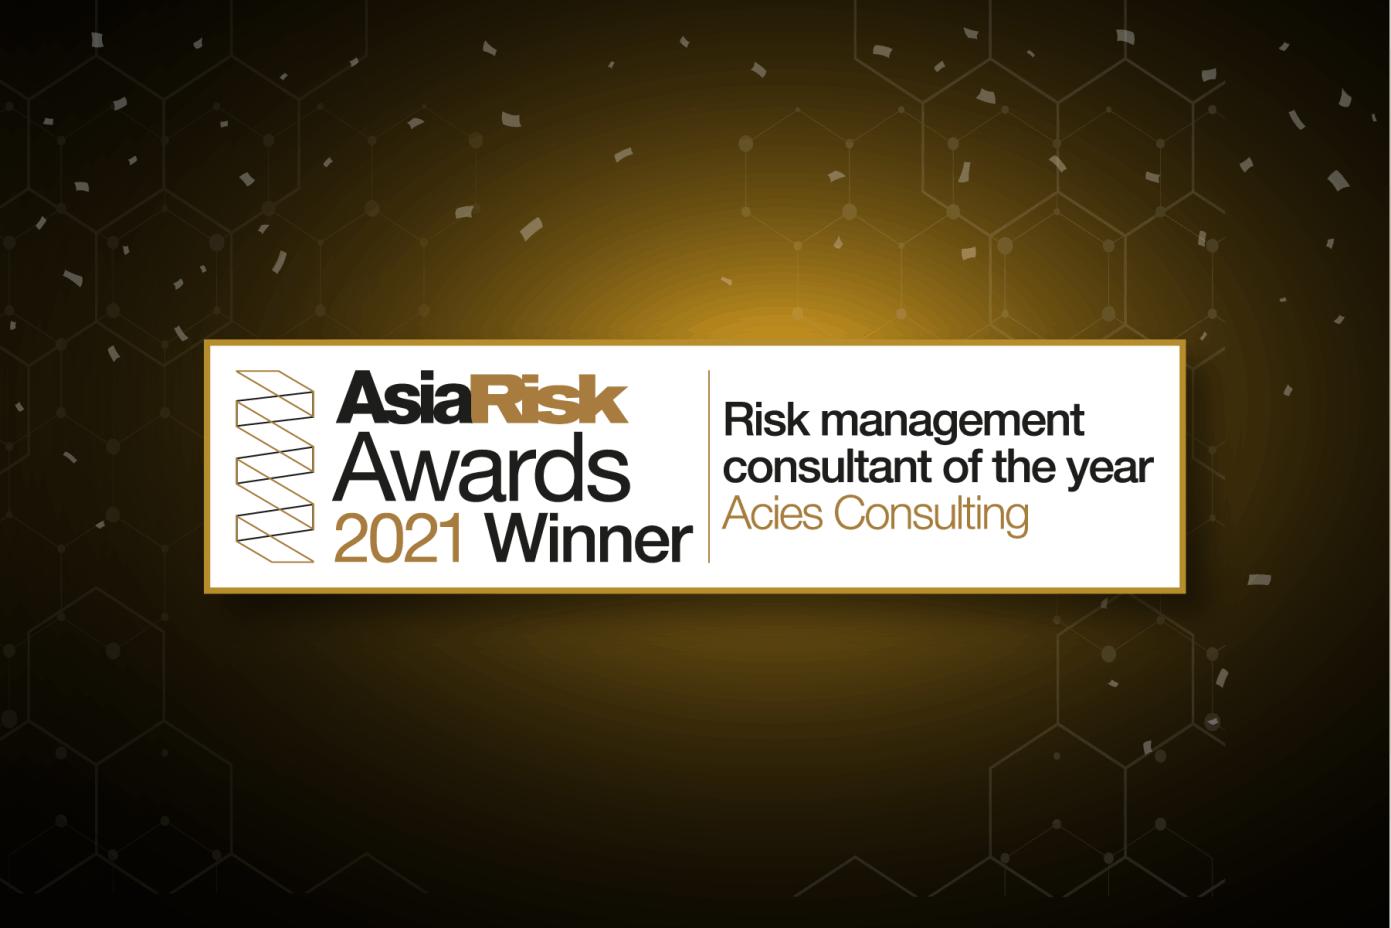 Acies awarded the 'Risk Management Consultant of the year' by Asia Risk